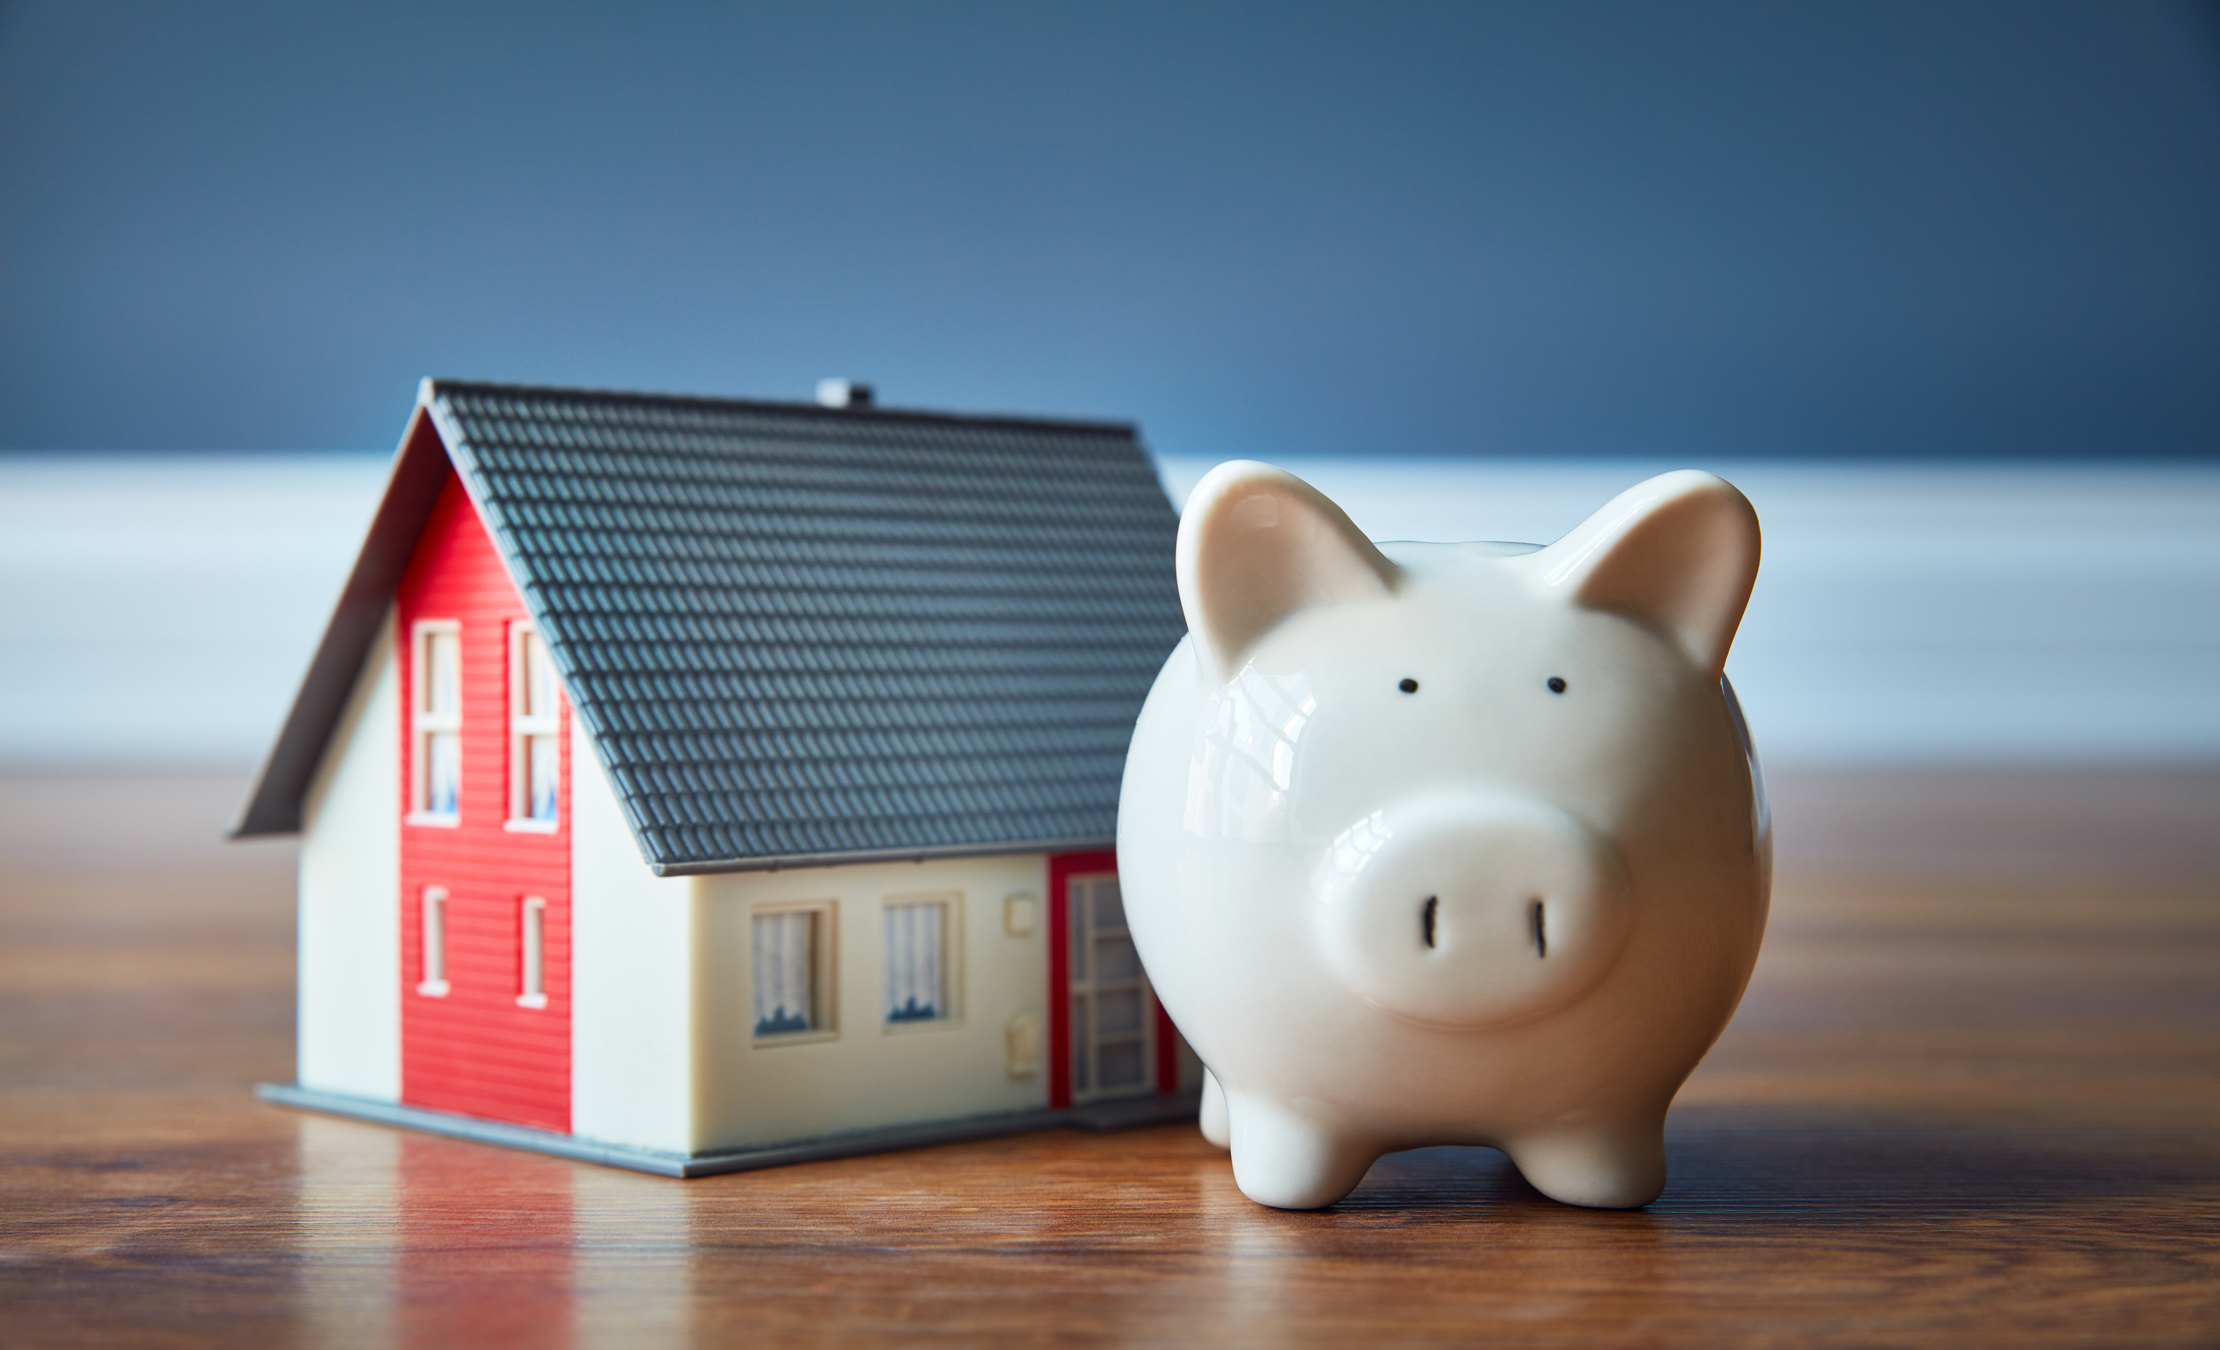 5 things to know before opening a first home savings account